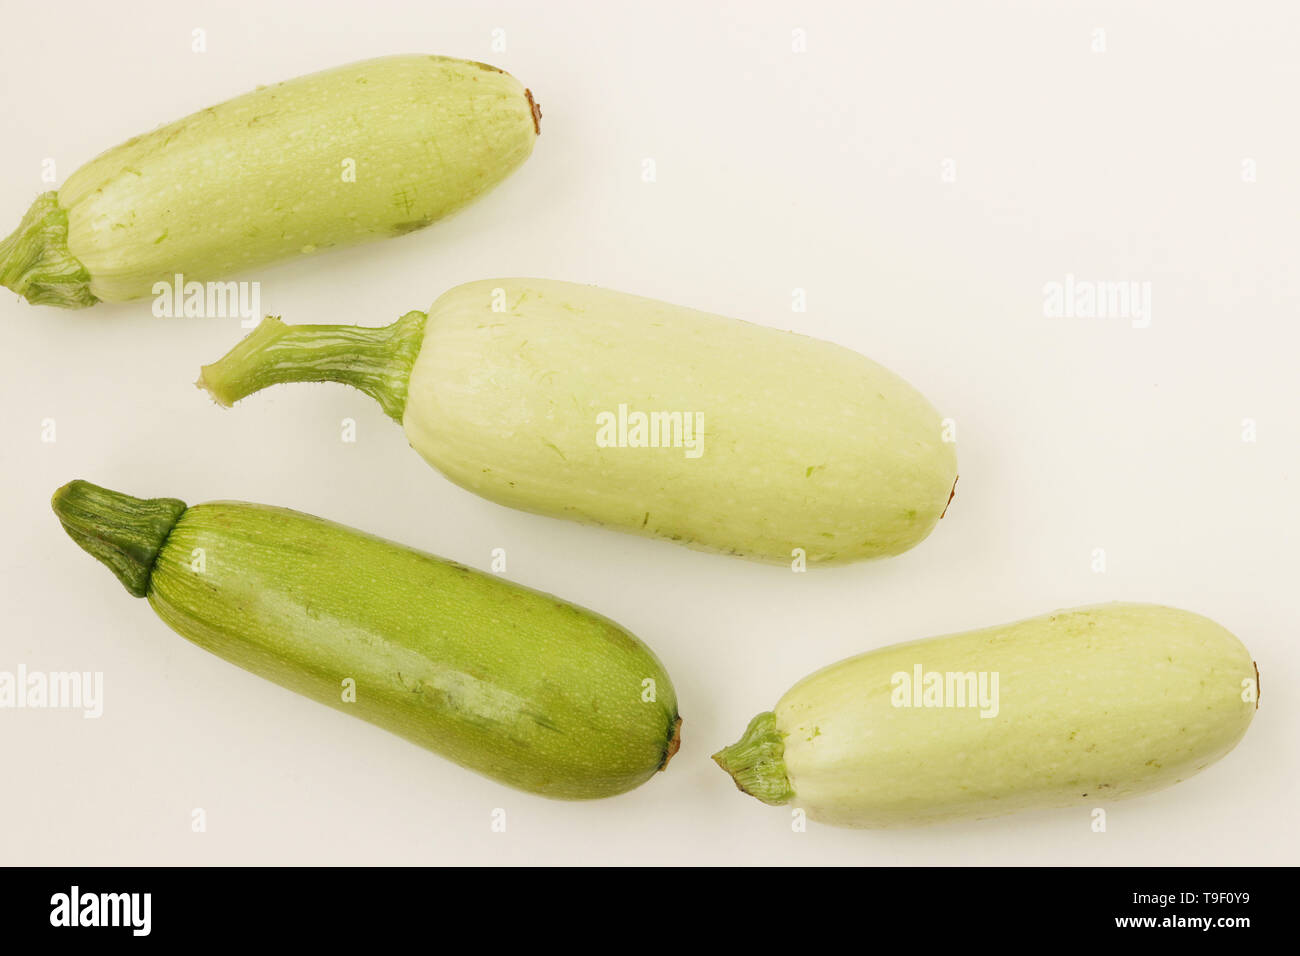 Courgettes arranged on a white background in random order, top view Stock Photo